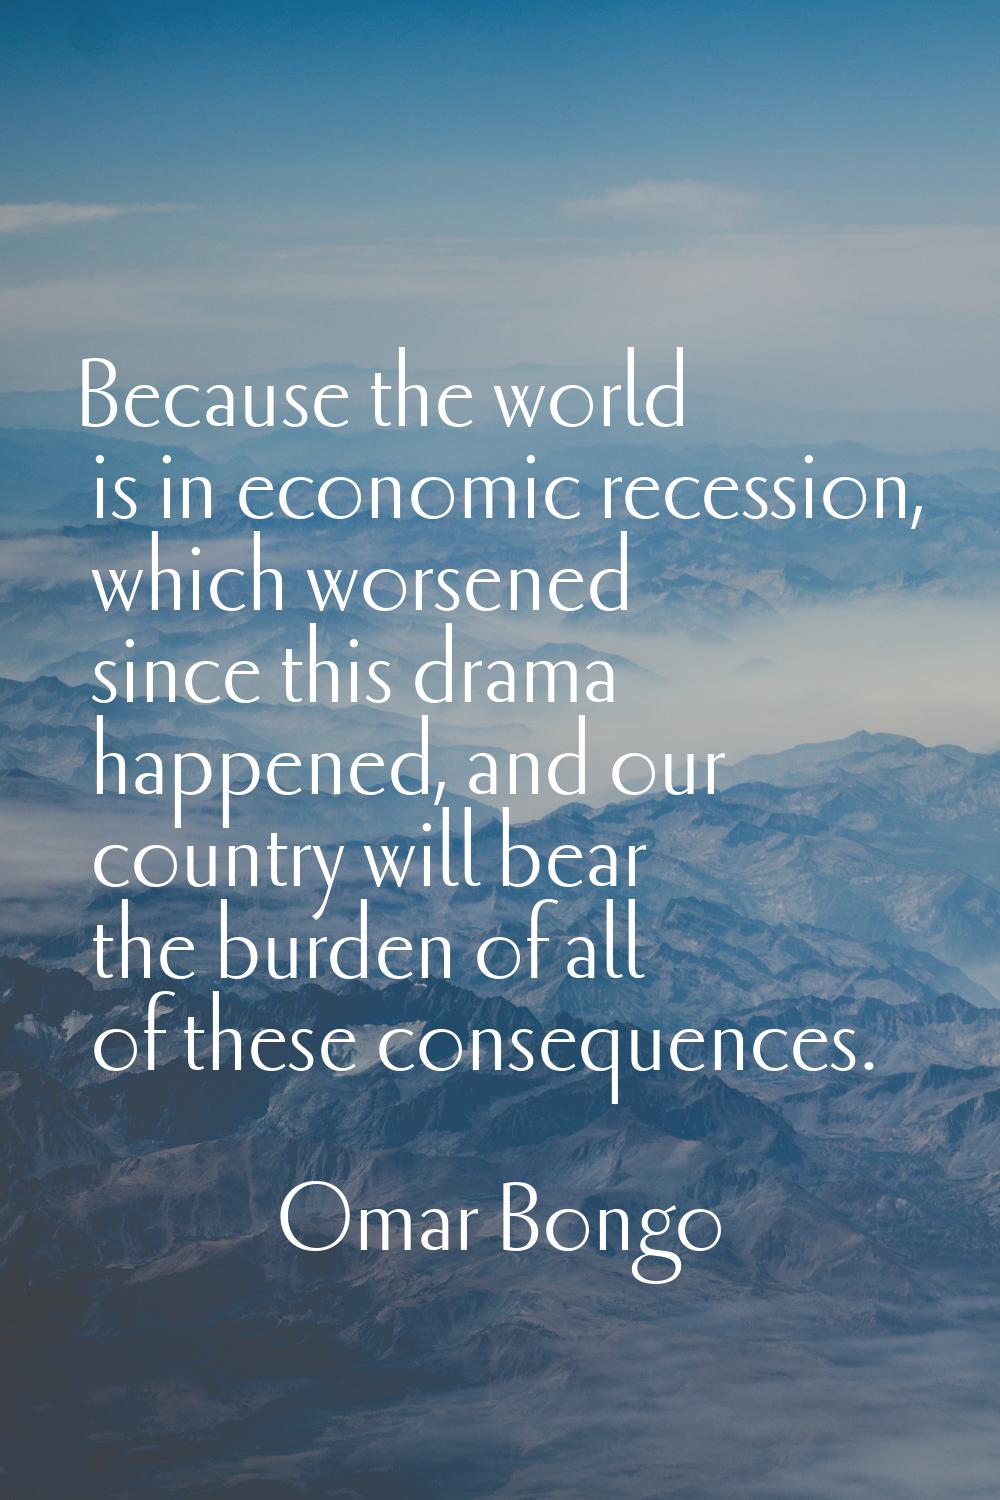 Because the world is in economic recession, which worsened since this drama happened, and our count